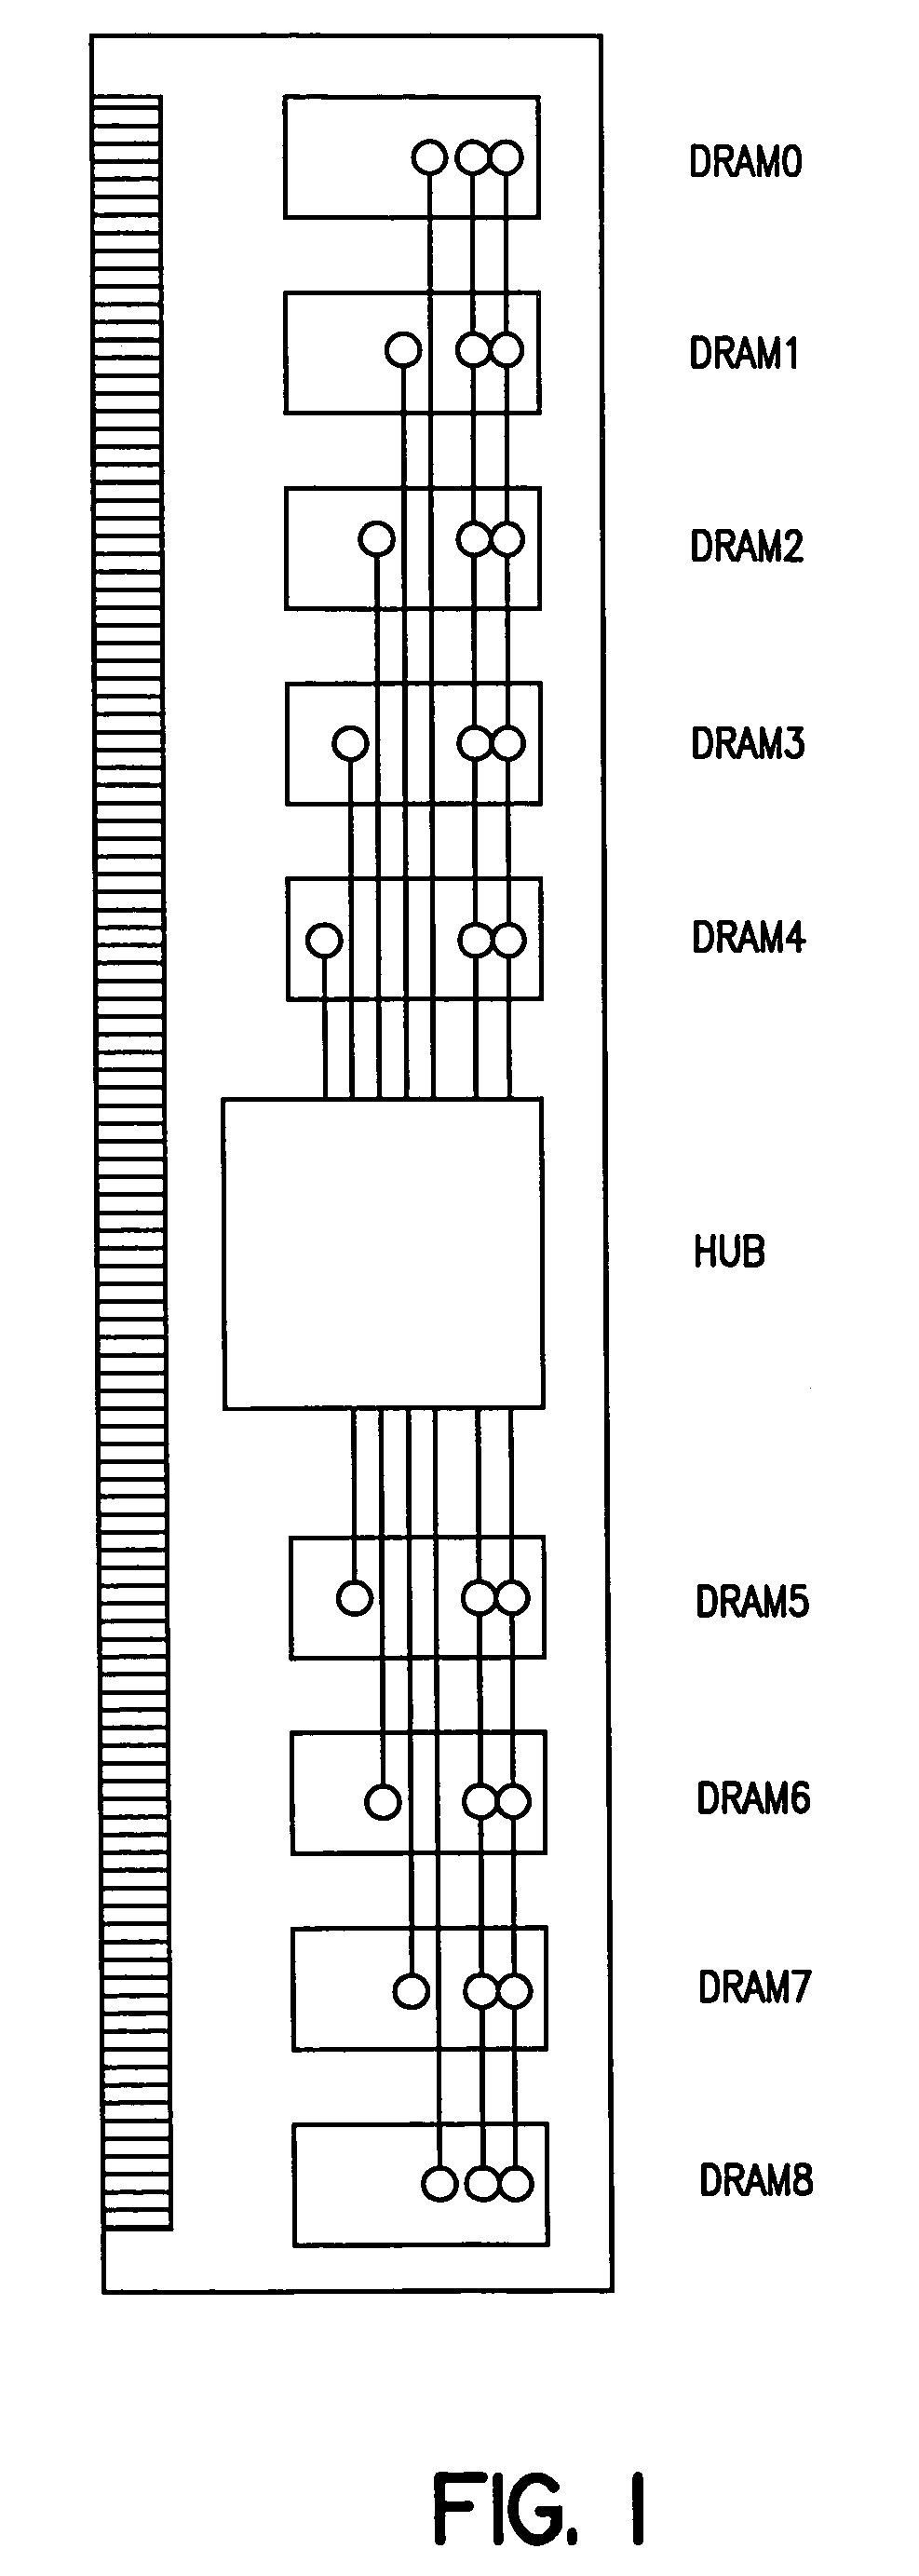 Method for measuring and compensating for skews of data transmission lines by compensating for skew by delay elements switched in response to the calculated reative skew